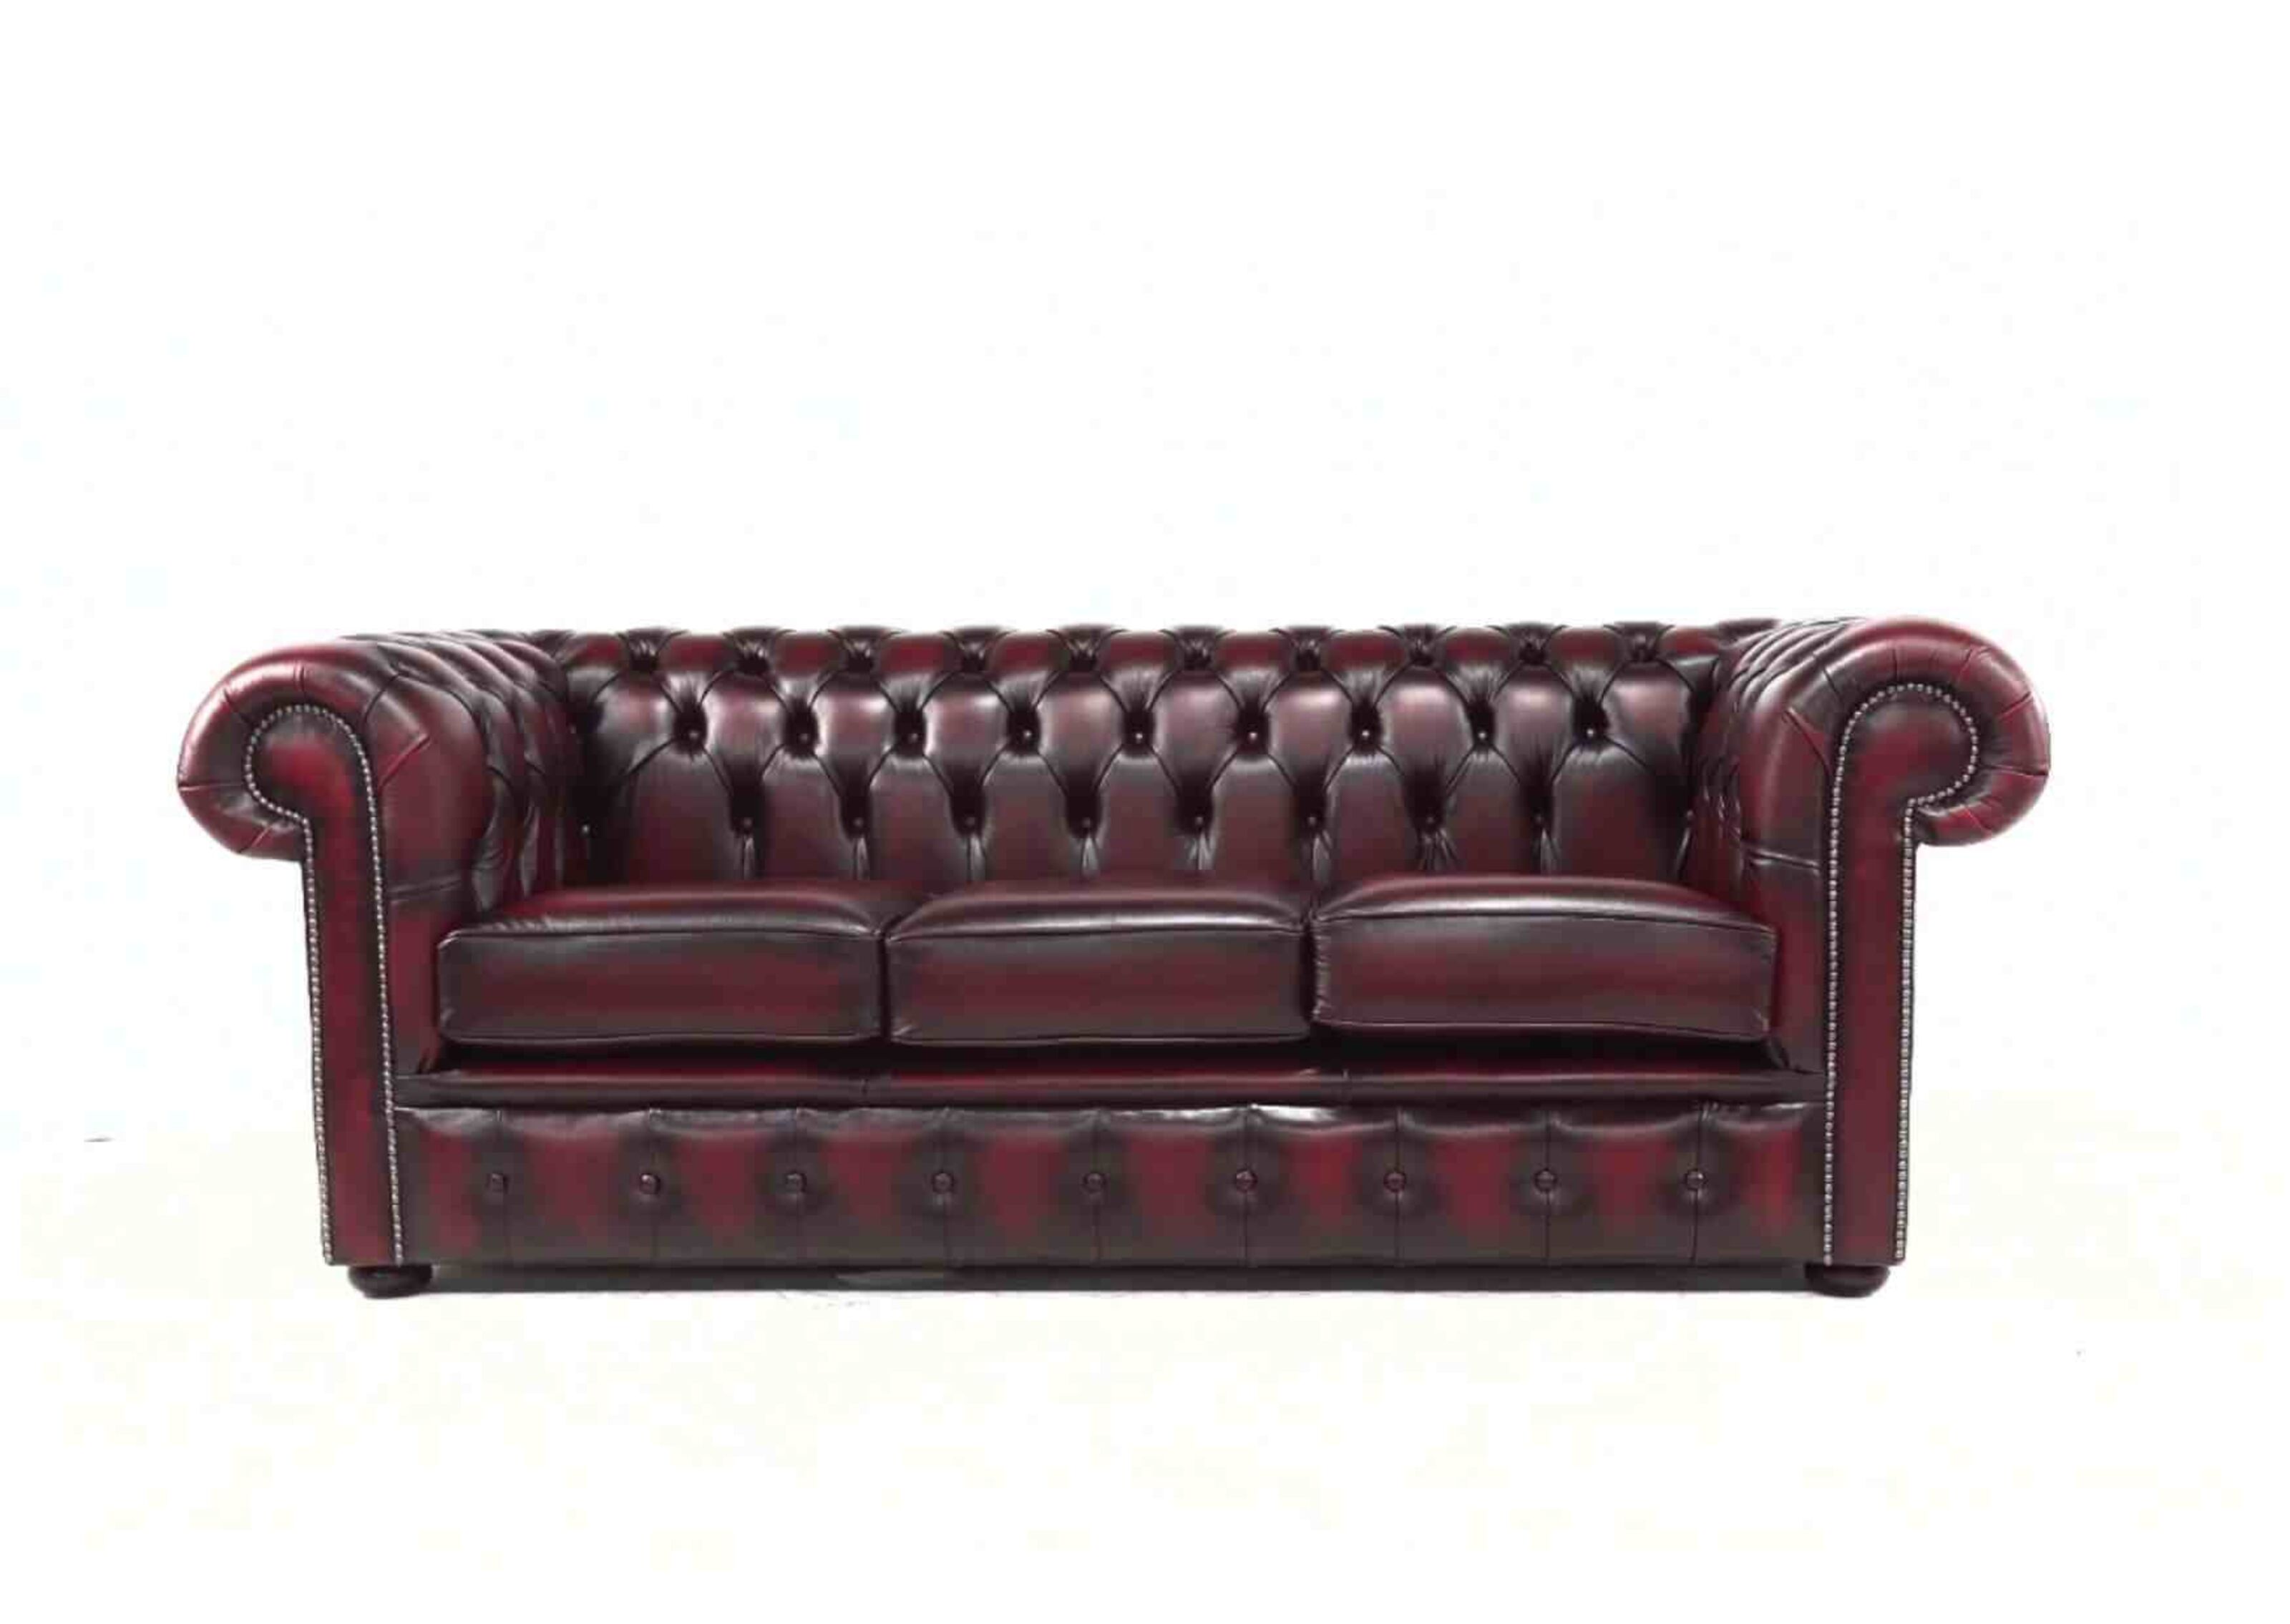 Costco Finds Affordable Chesterfield Sofa Selections  %Post Title